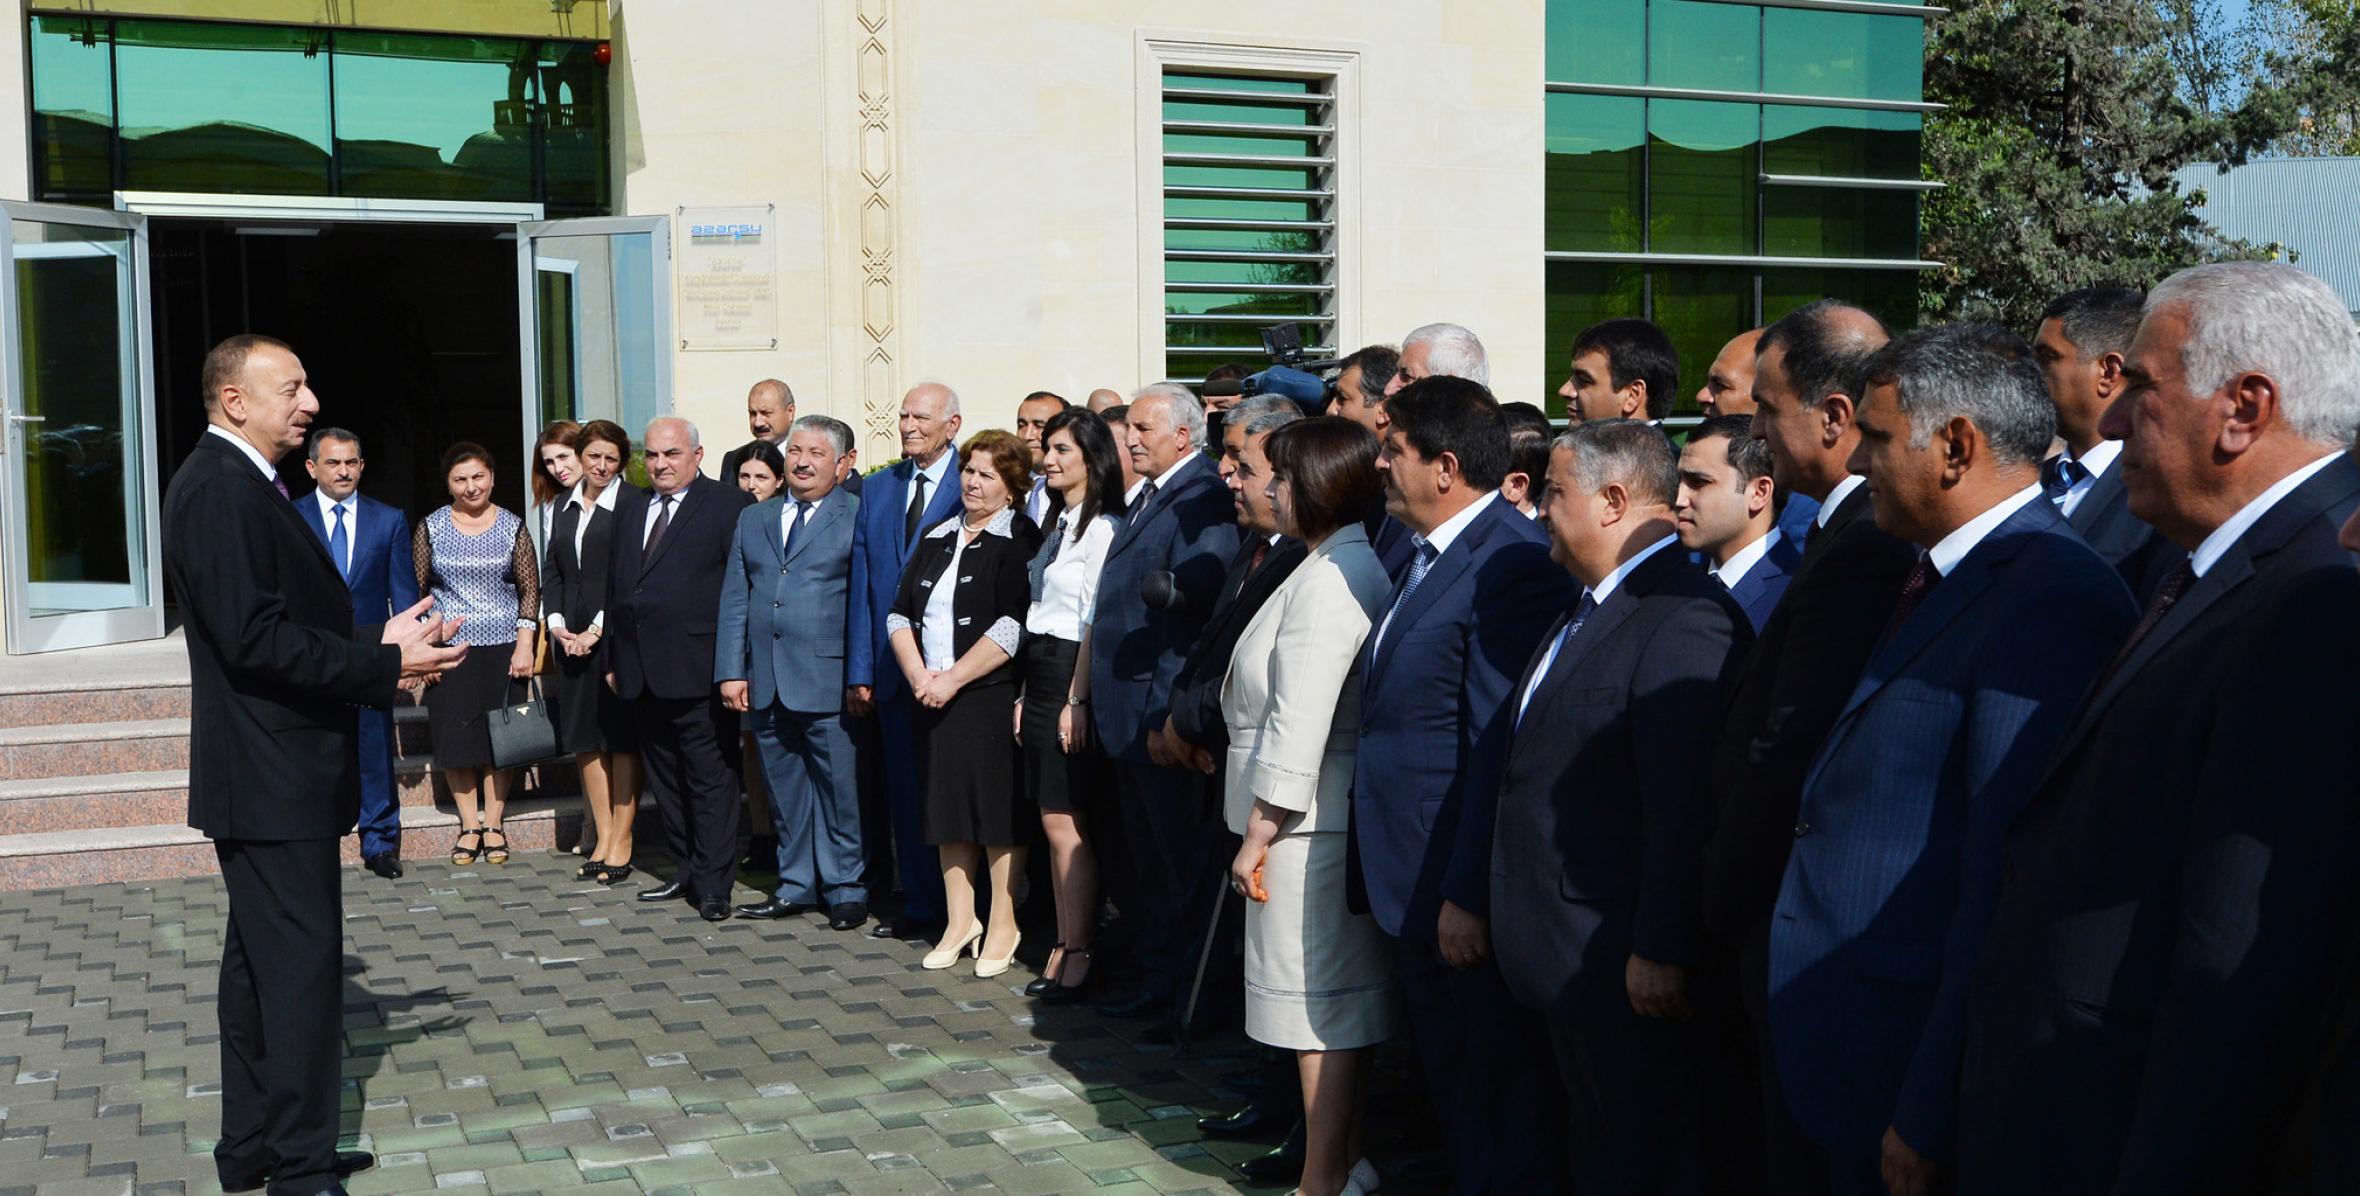 Speech by Ilham Aliyev at the ceremony marking the completion of a project to reconstruct water supply system of Ujar